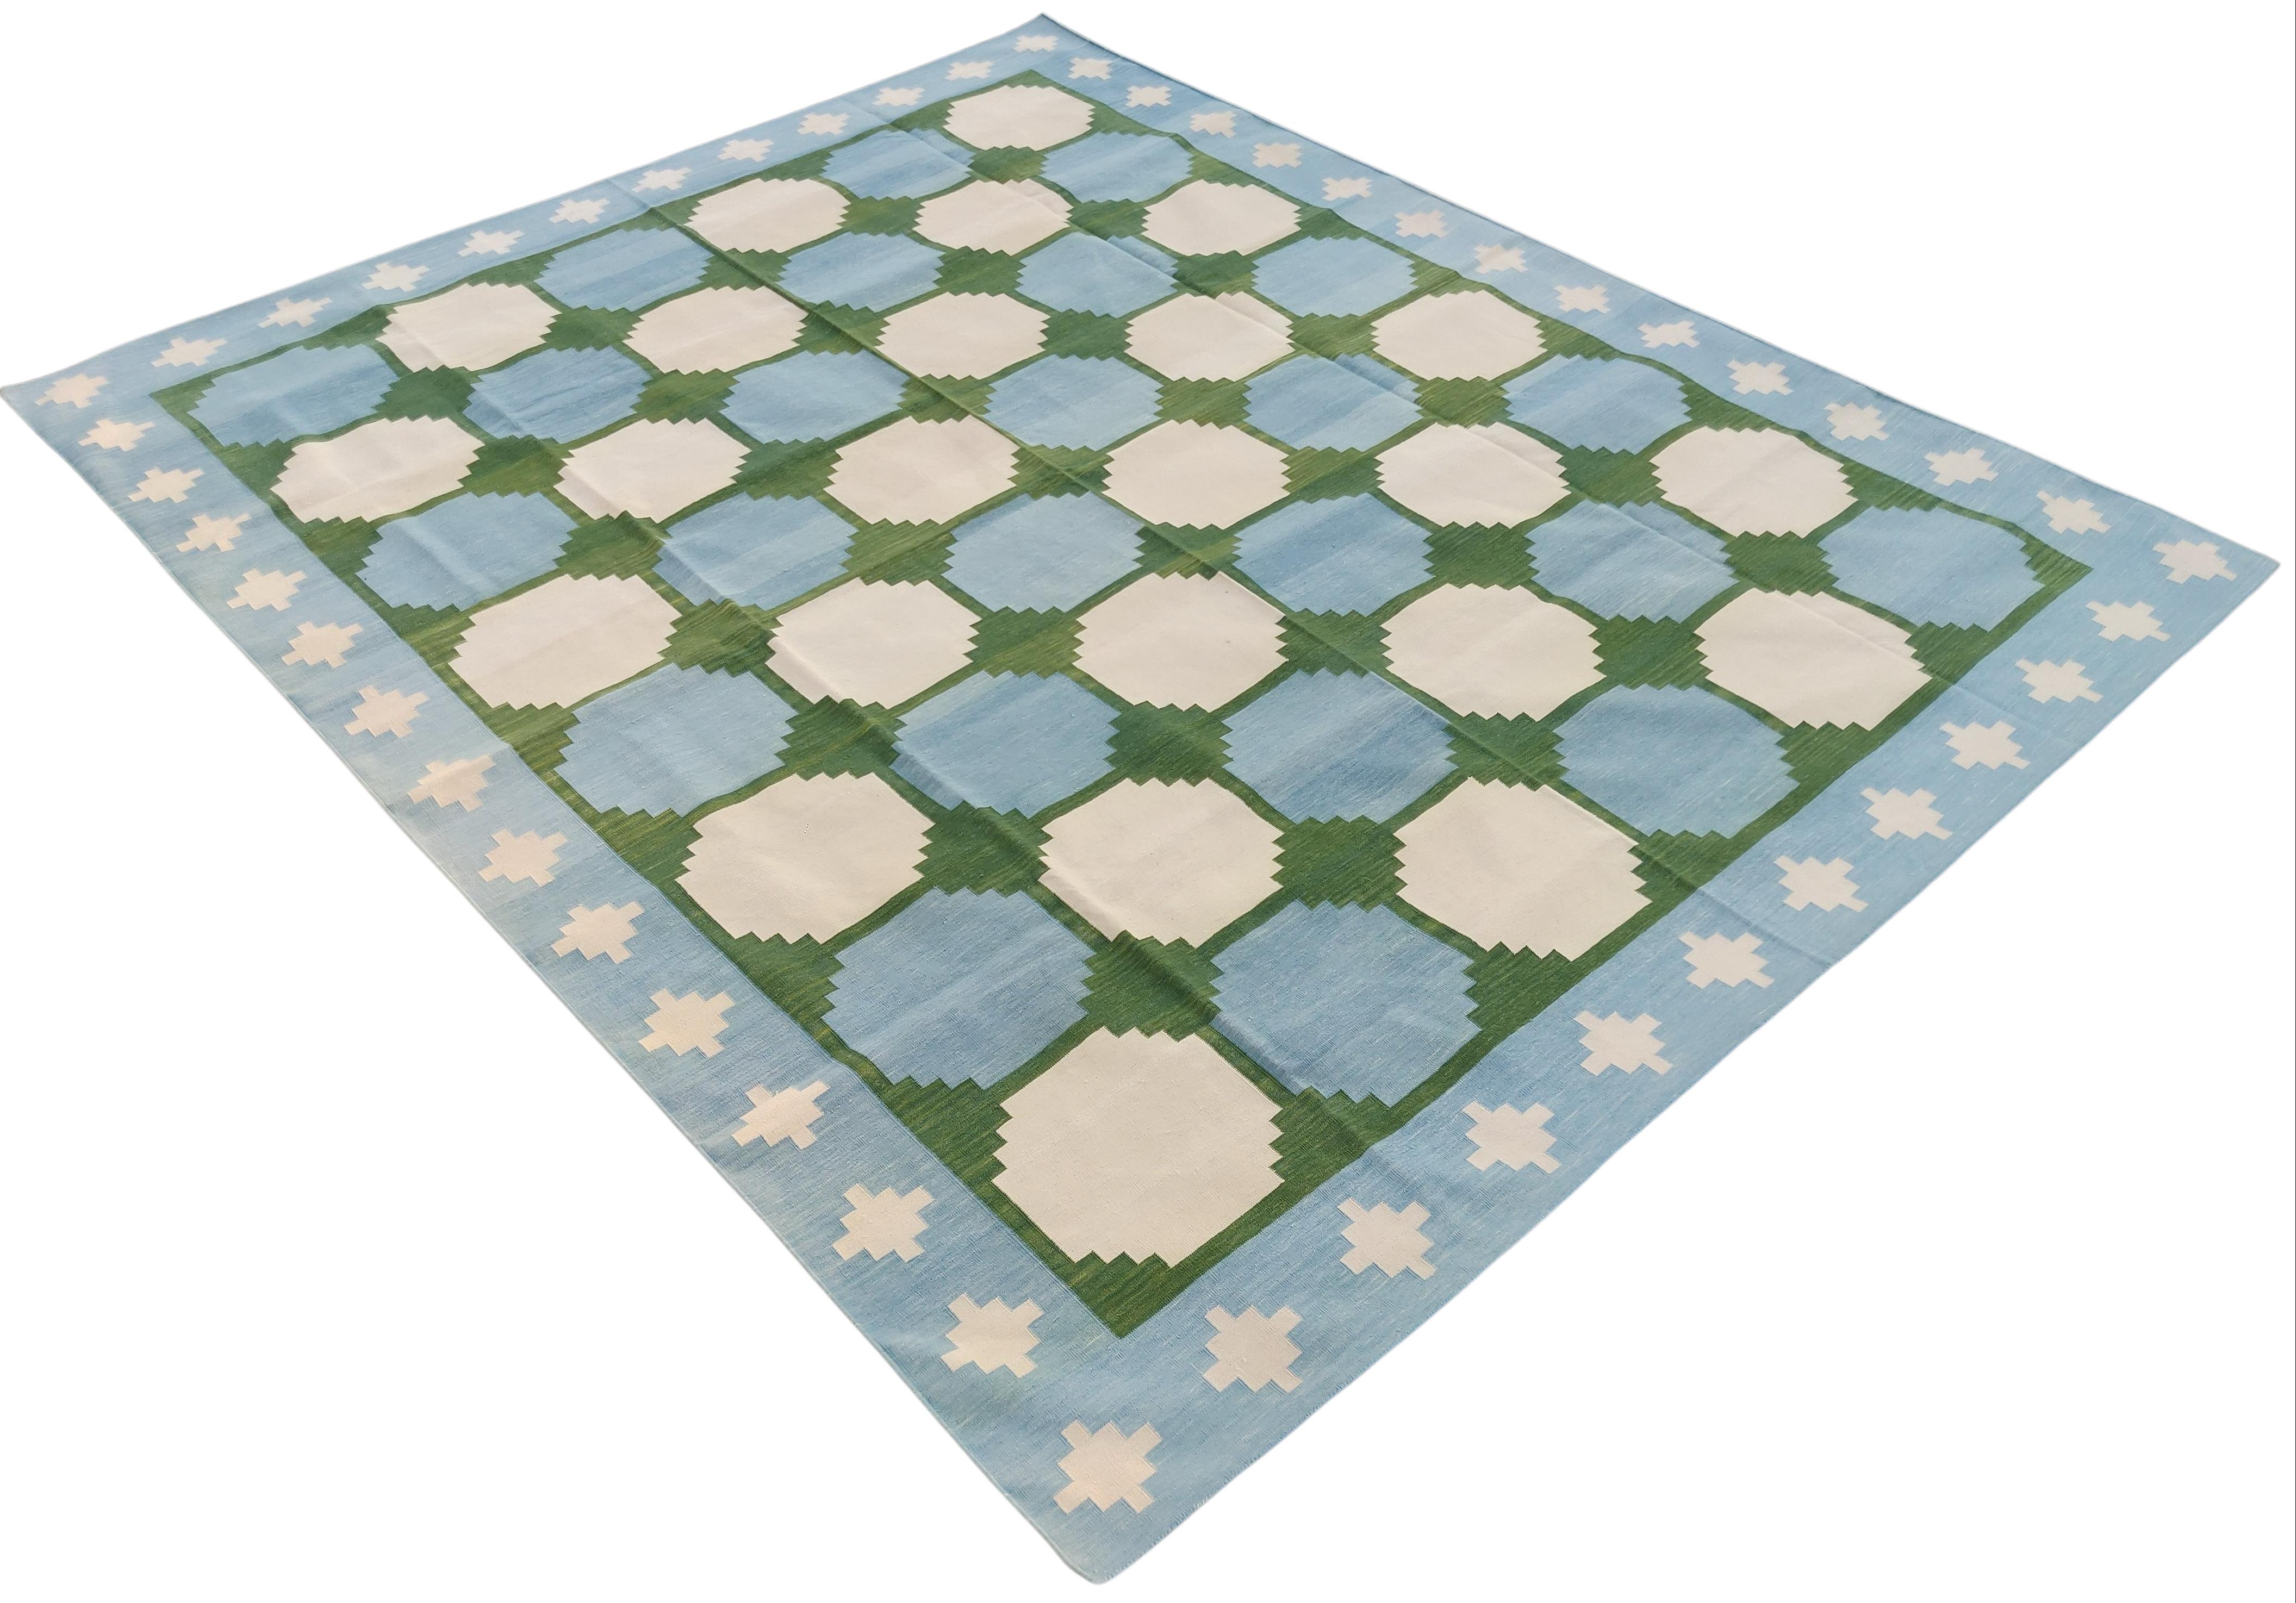 Cotton Natural Vegetable Dyed Forest Green , Sky Blue And Cream Tile Patterned Swedish Rug-6'x9'
These special flat-weave dhurries are hand-woven with 15 ply 100% cotton yarn. Due to the special manufacturing techniques used to create our rugs, the